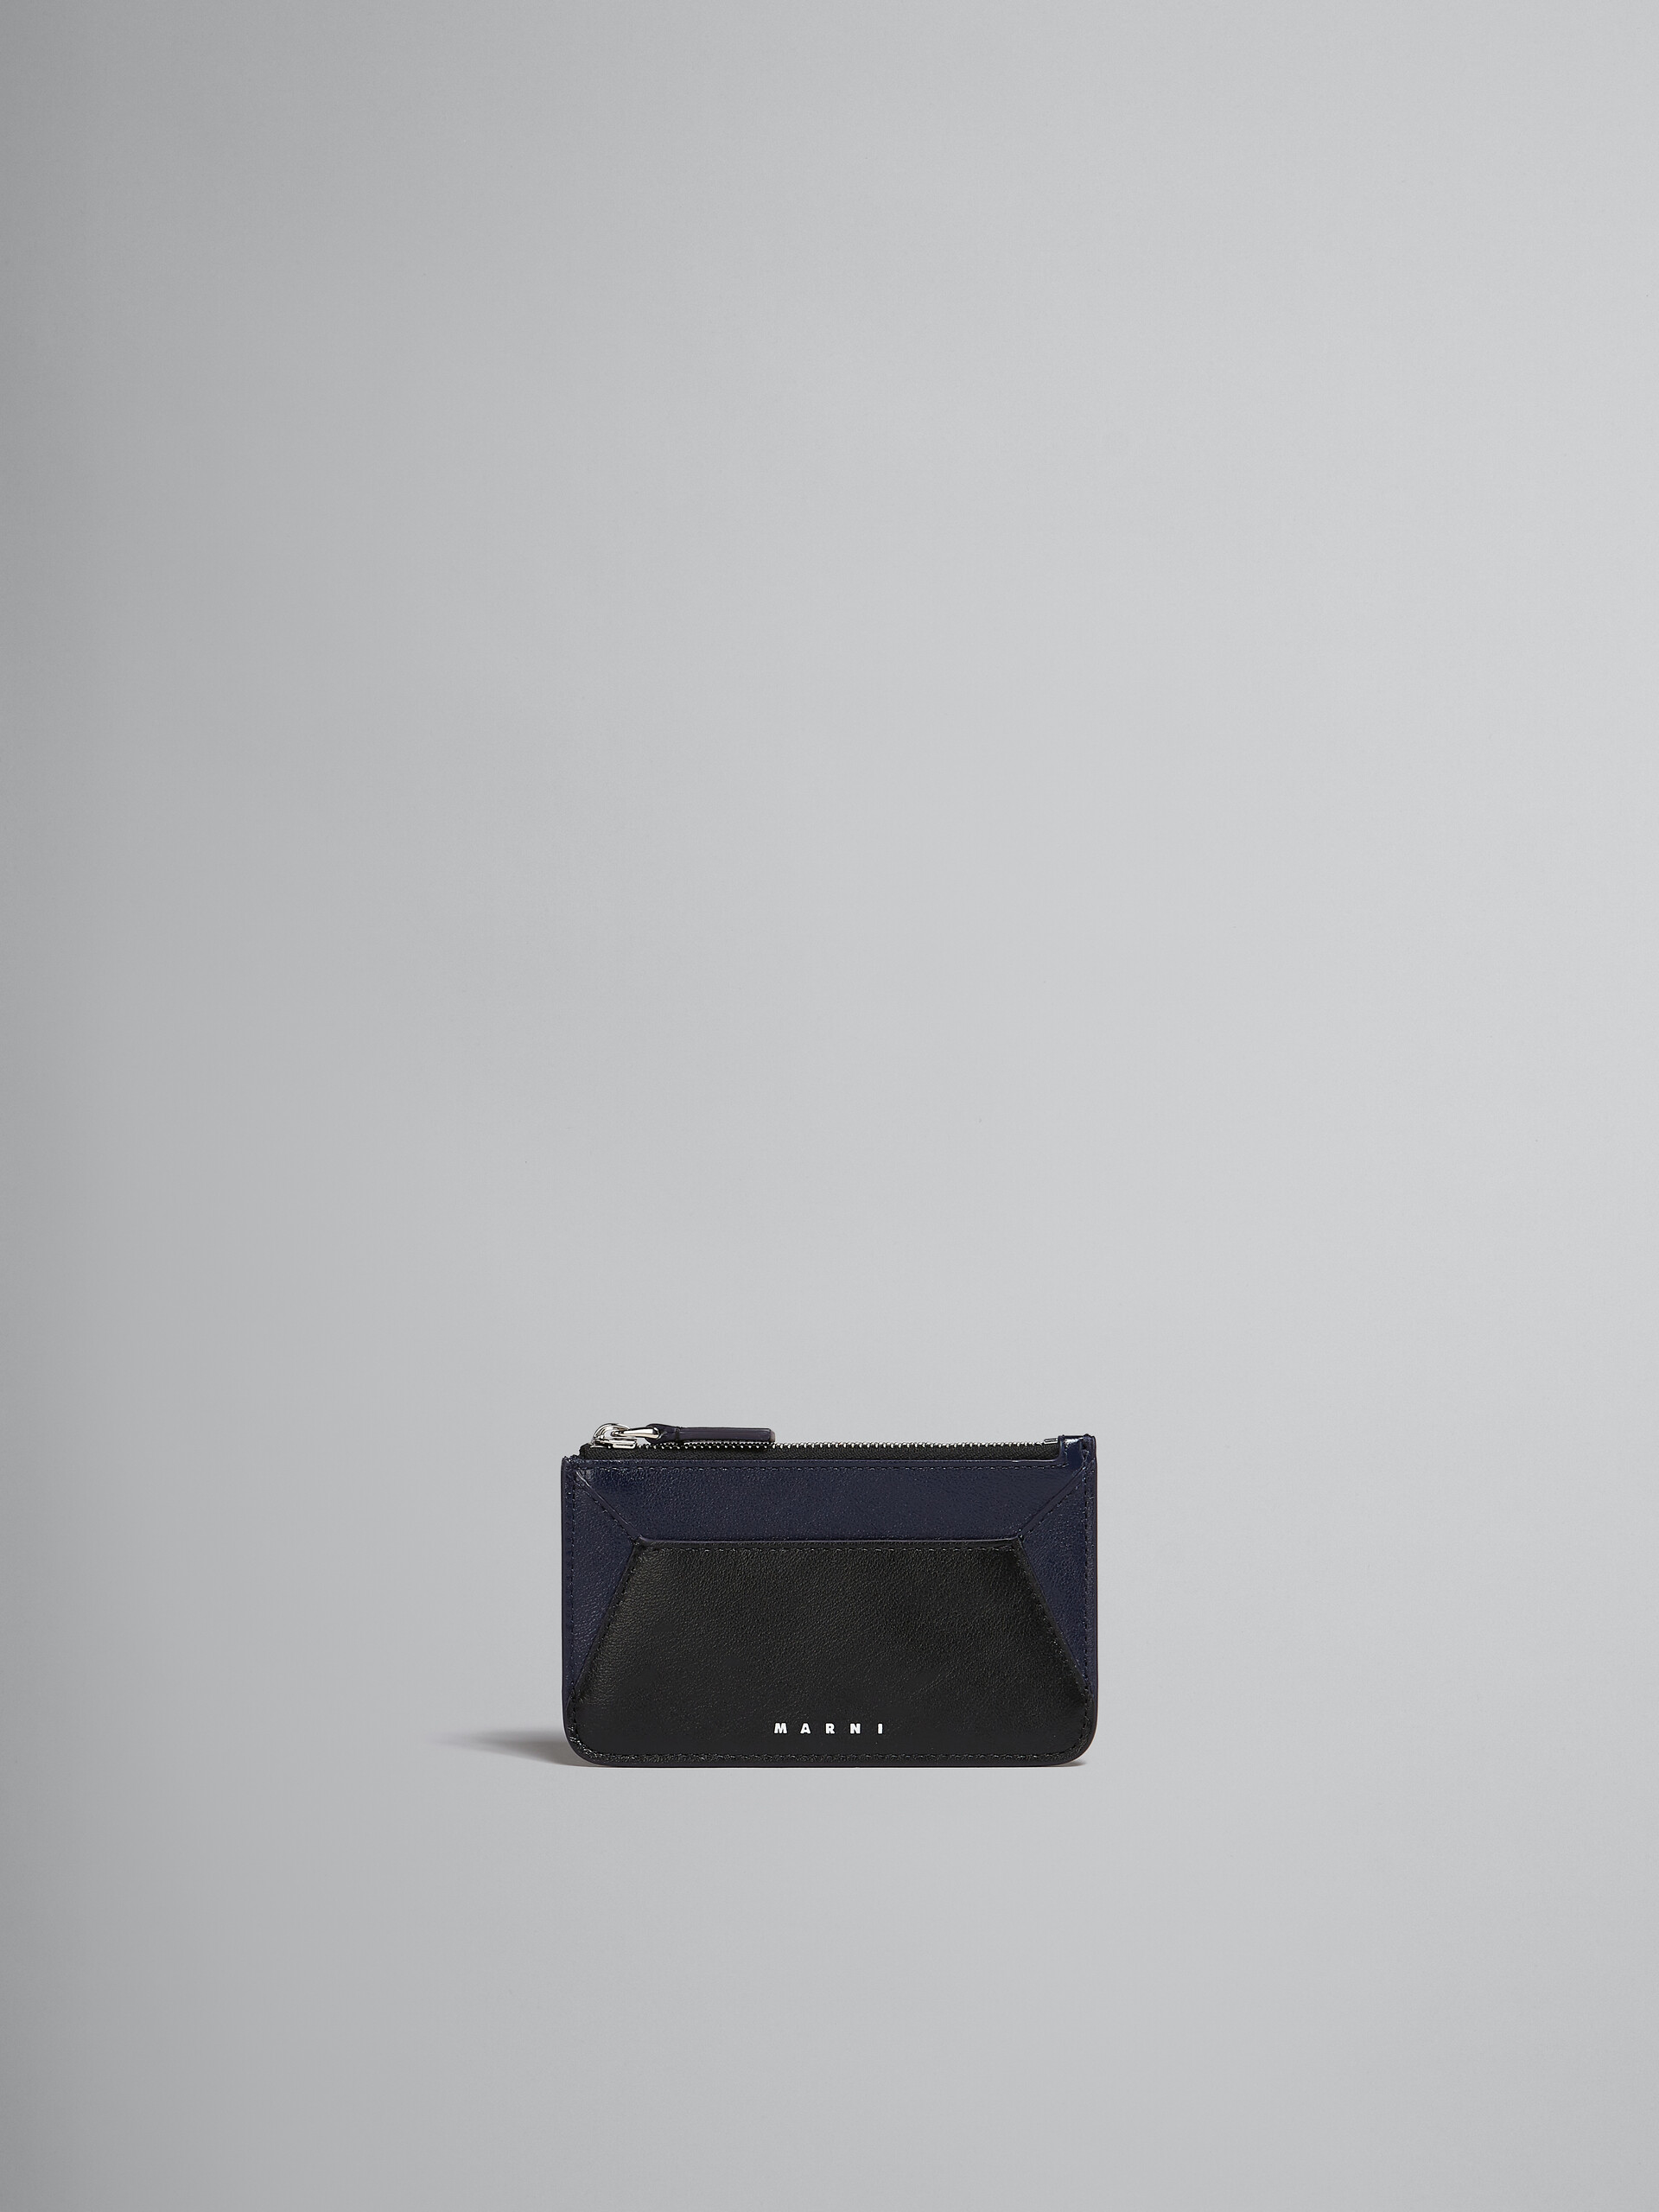 Navy blue and black leather card case - Wallets - Image 1